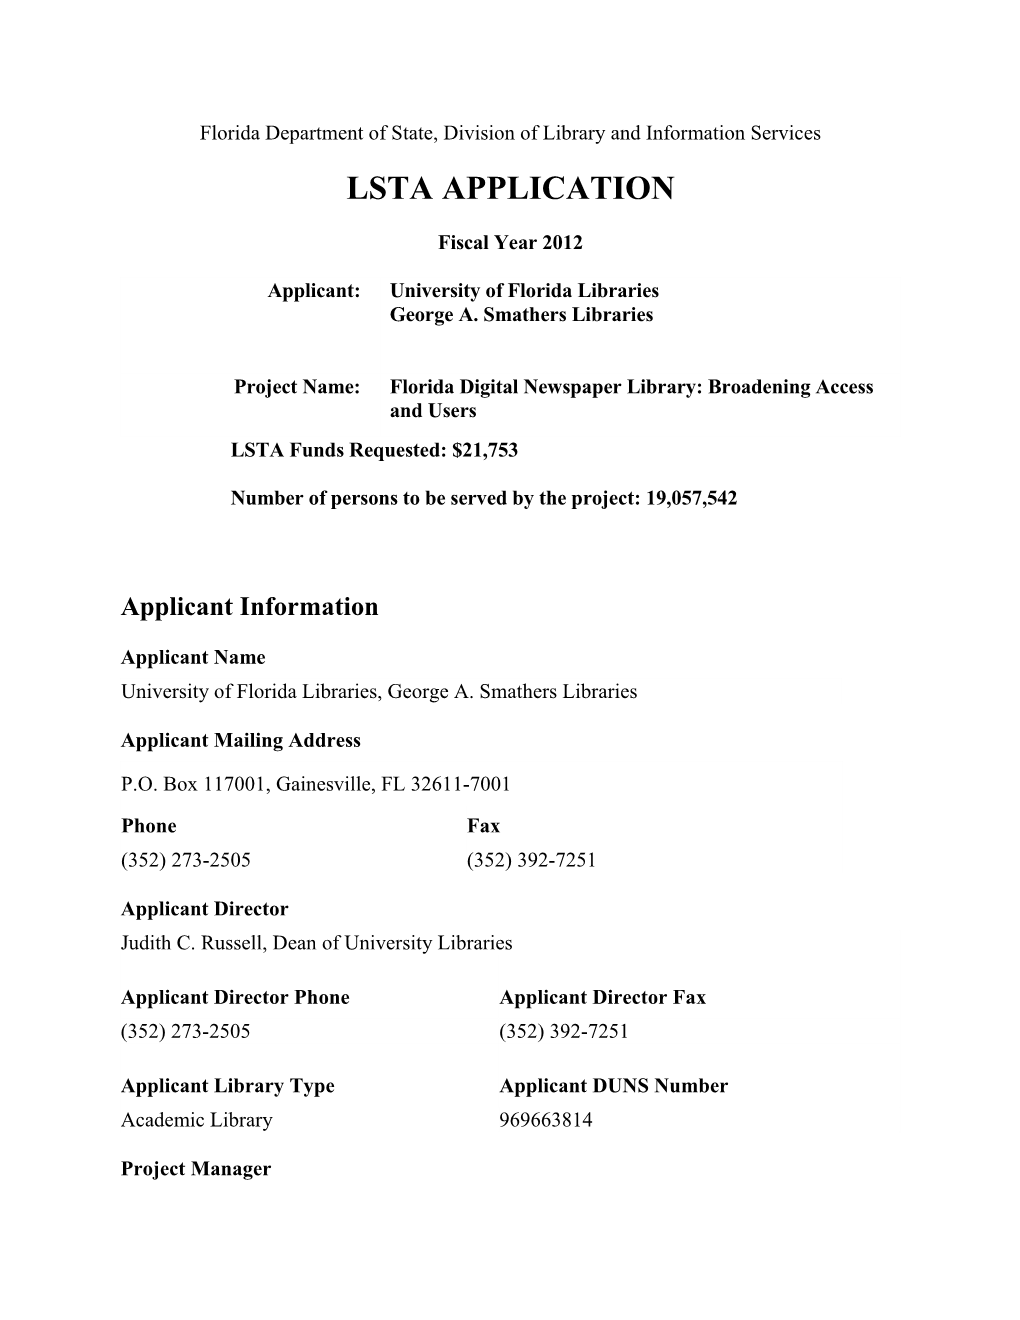 Florida Department of State, Division of Library and Information Services LSTA APPLICATION